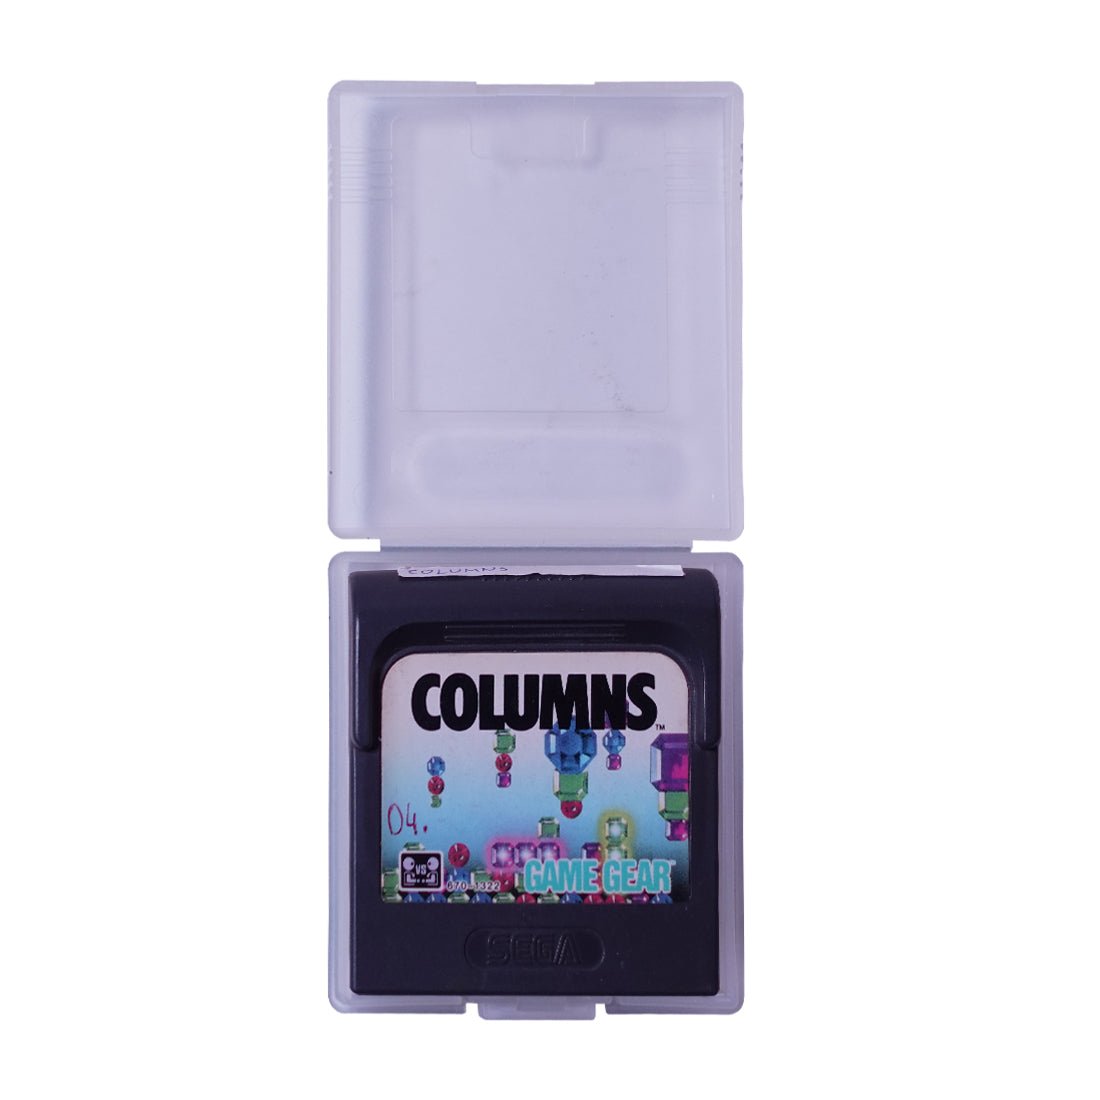 (Pre-Owned) Collumns - Gameboy Classic - ريترو - Store 974 | ستور ٩٧٤